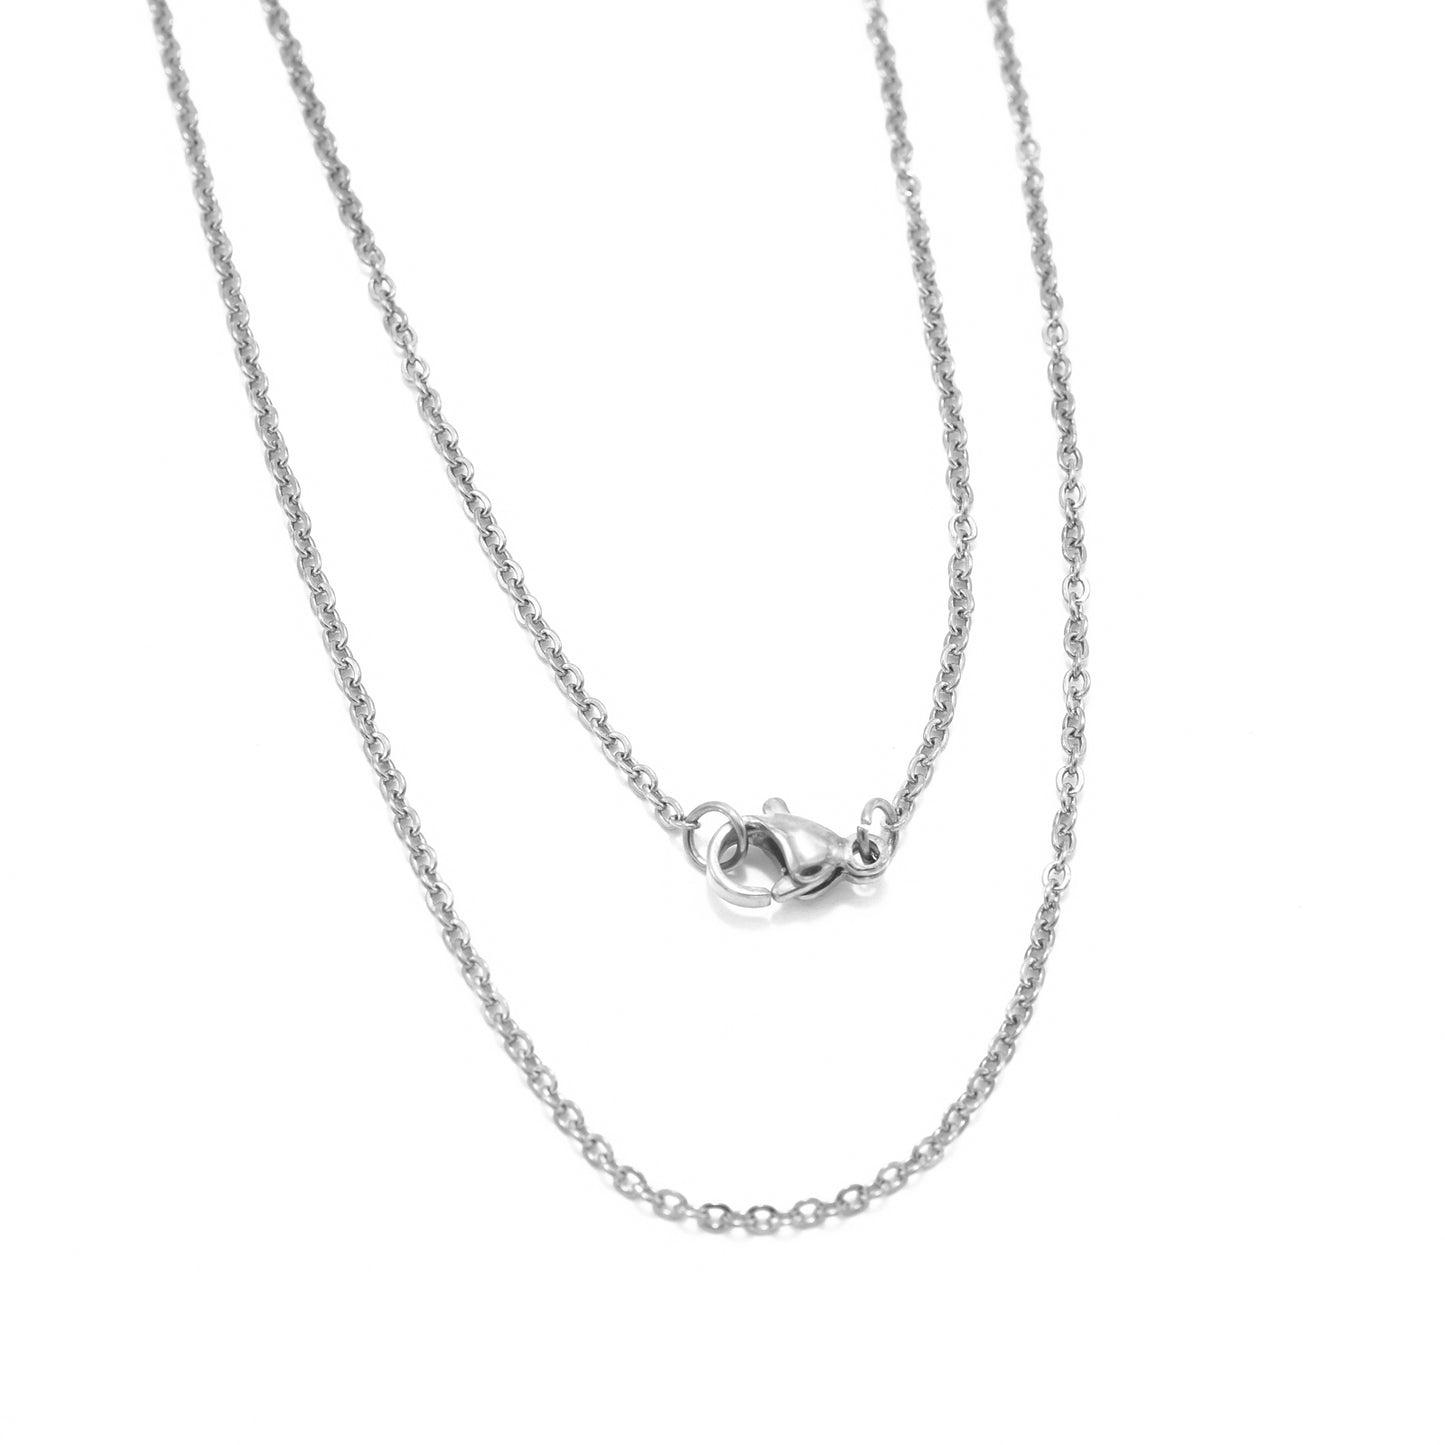 Fine stainless steel chain / silver / 45 cm